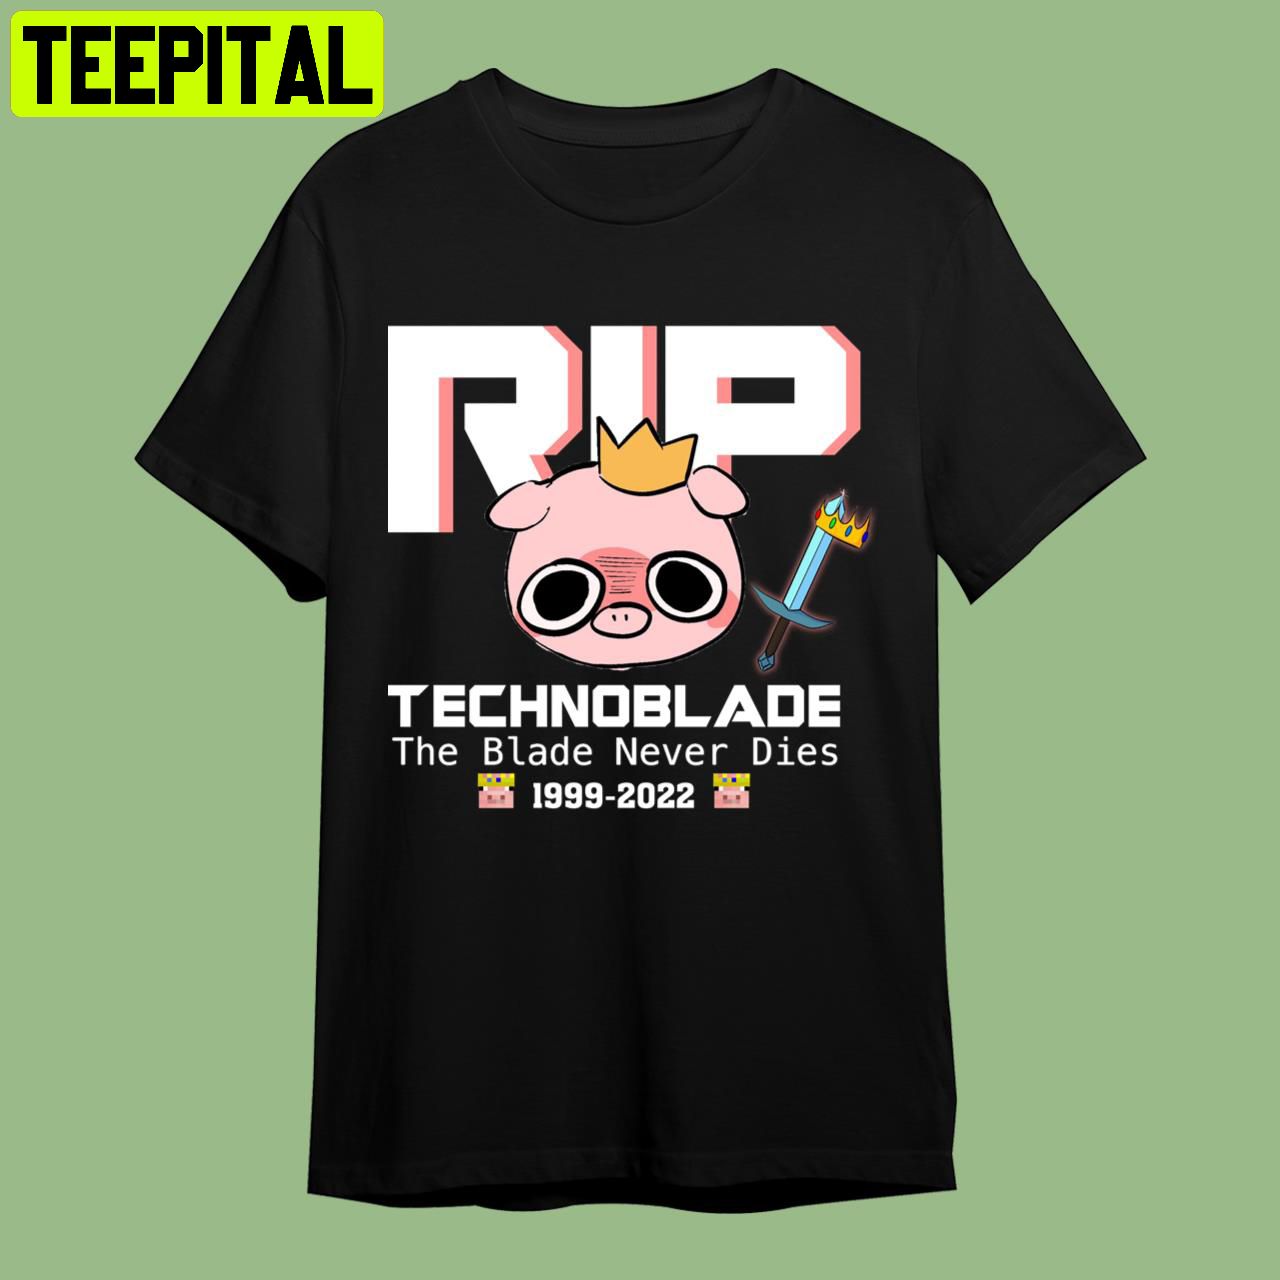 Technoblade Never Dies T-Shirt t-shirt by To-Tee Clothing - Issuu